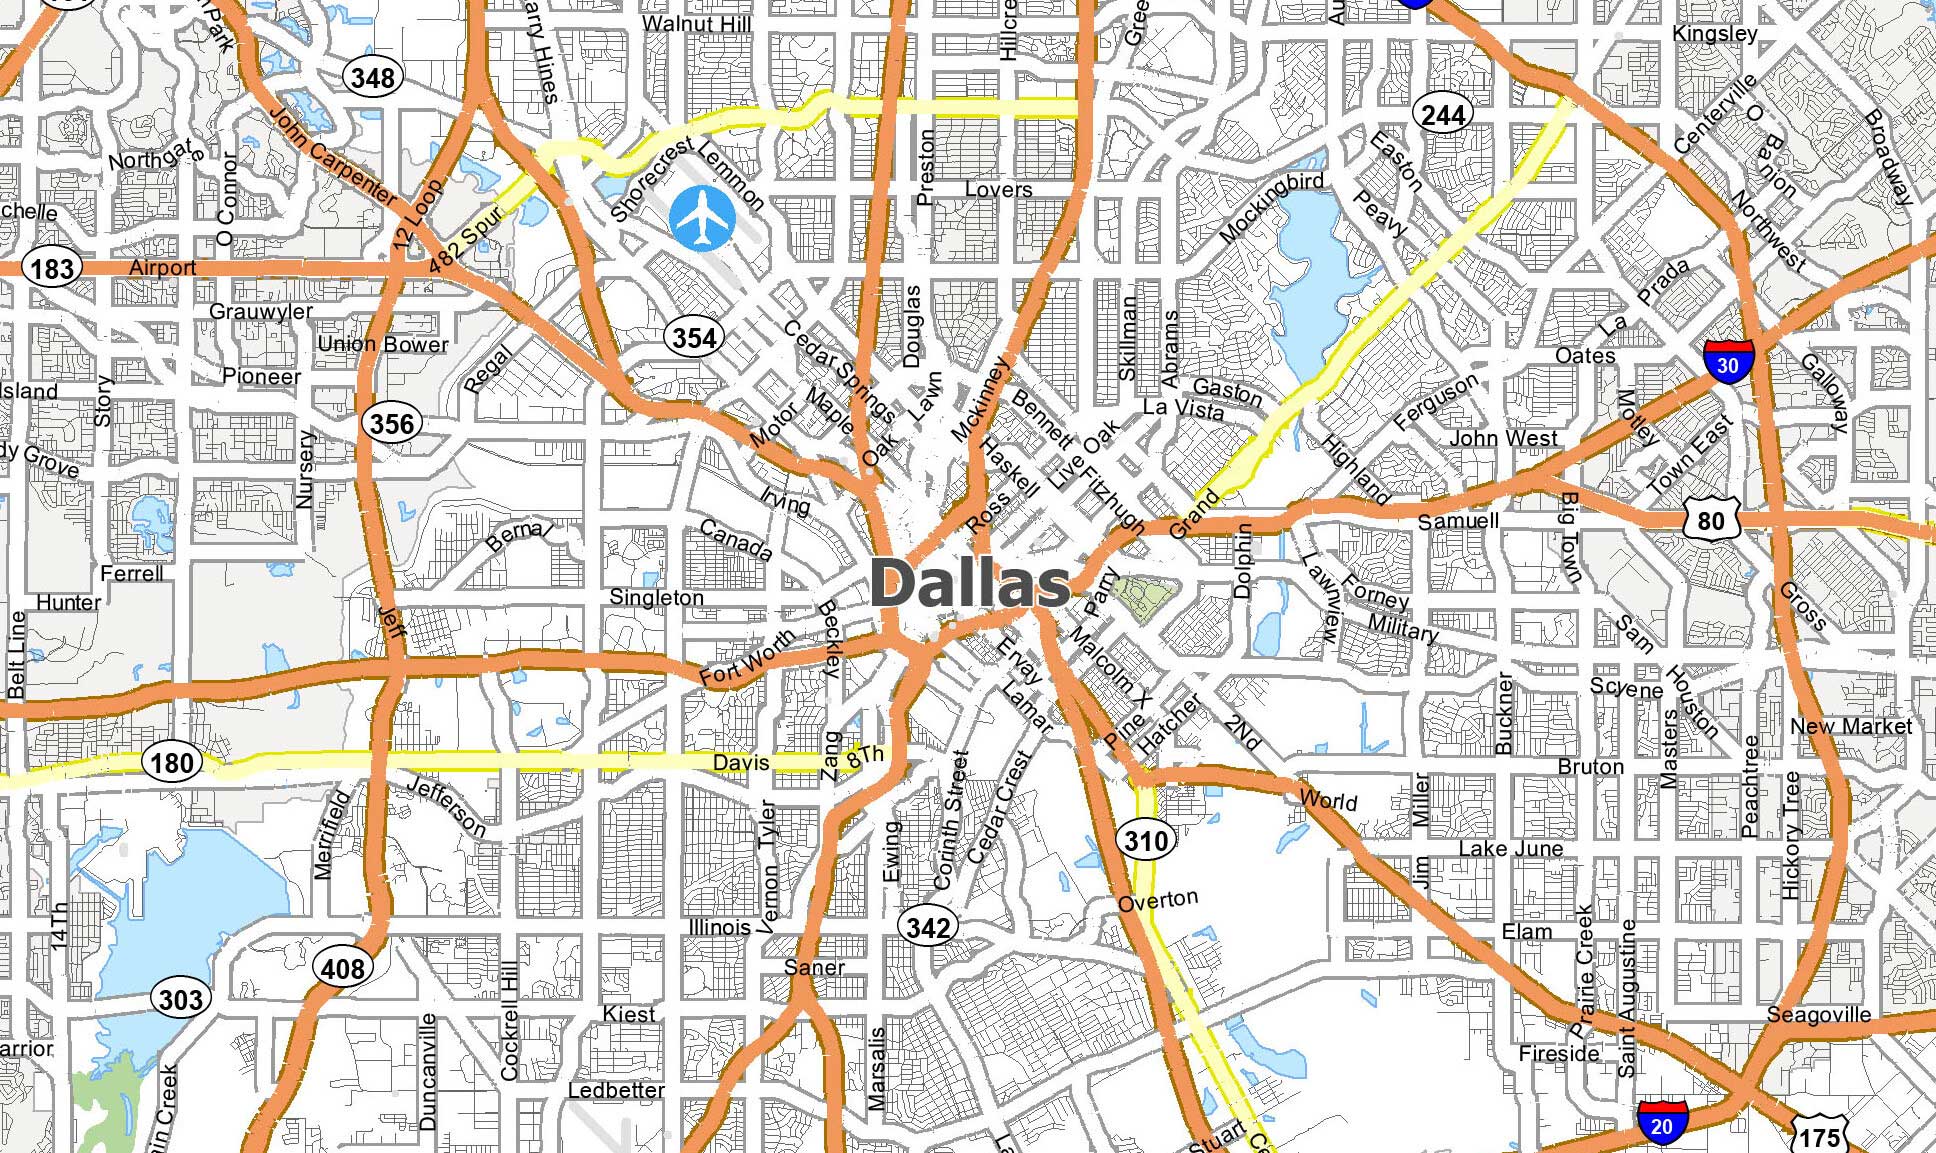 Map of Dallas, Texas - GIS Geography